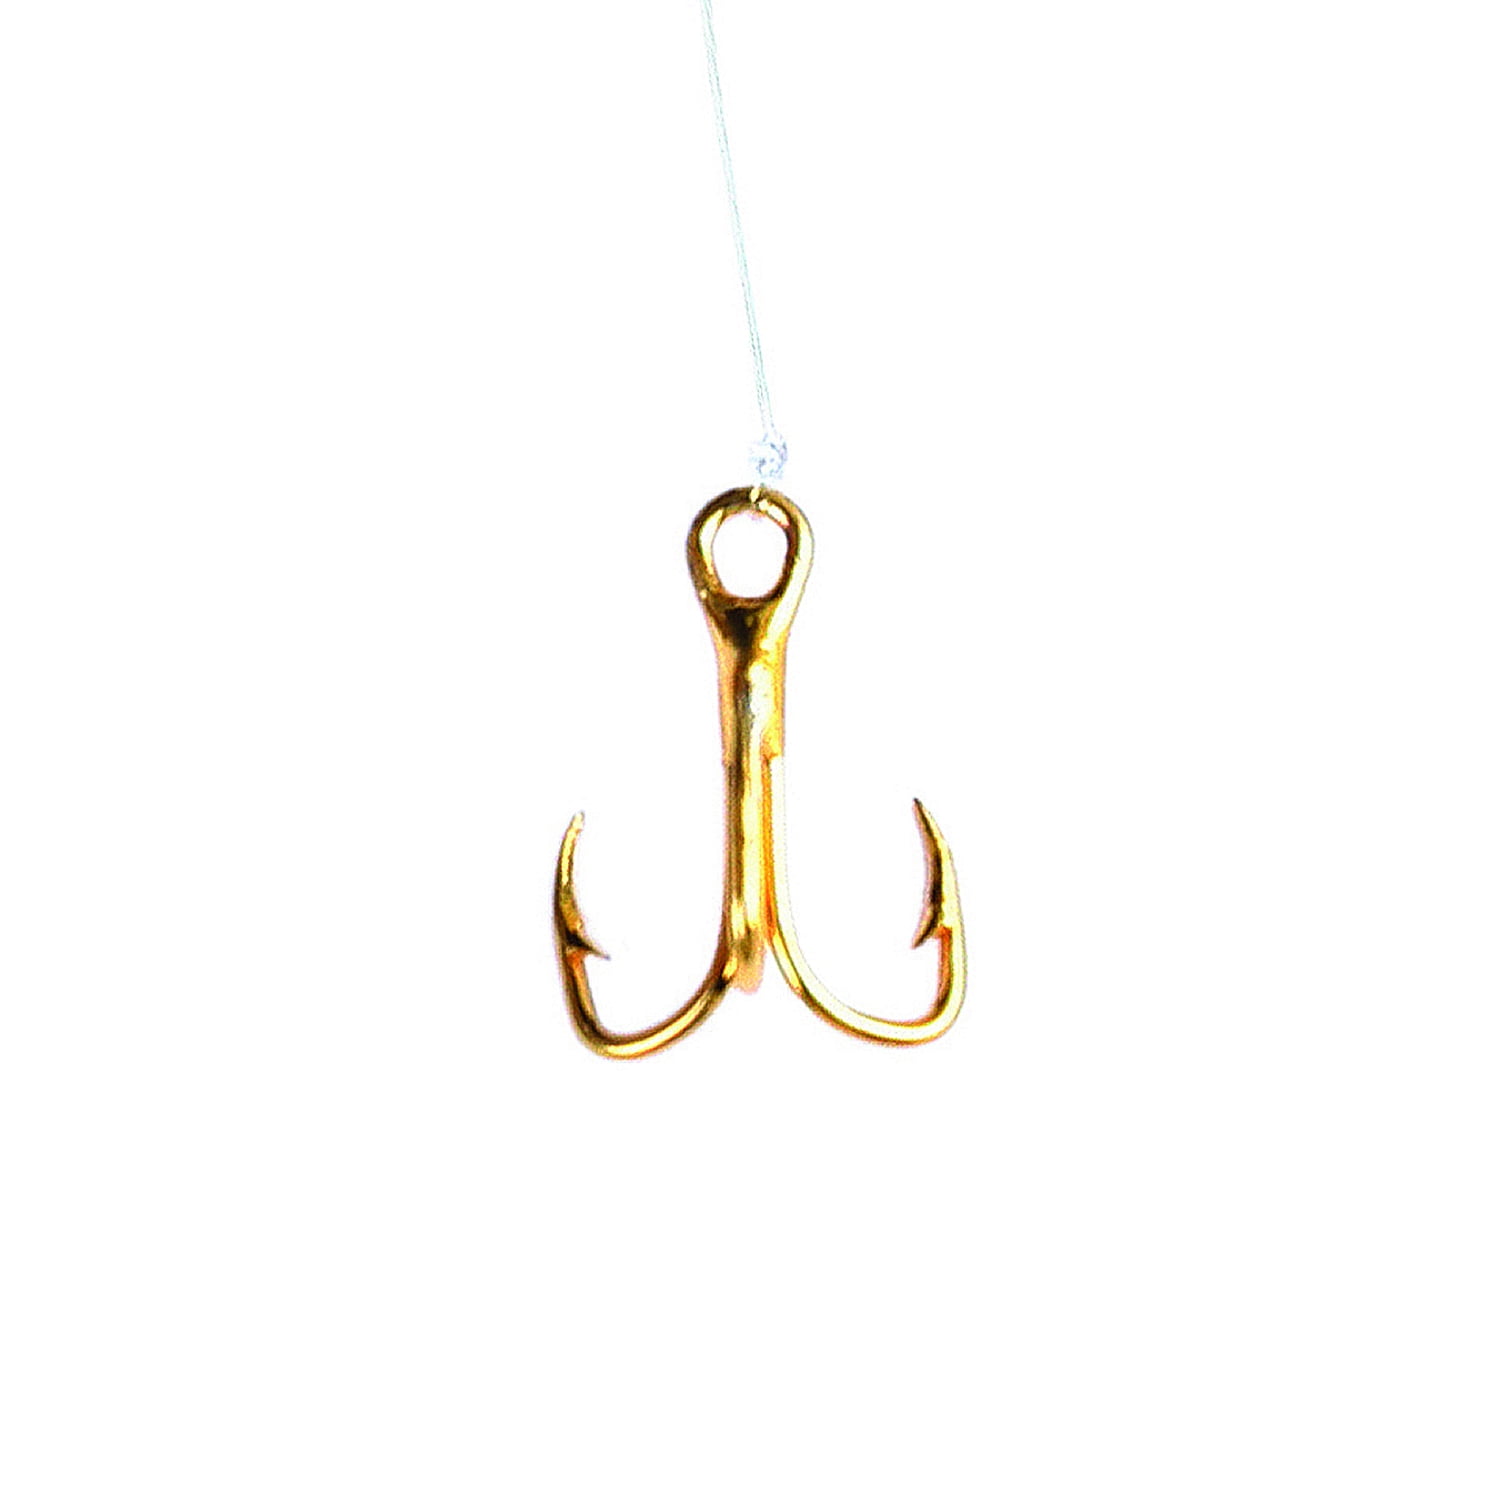 Eagle Claw 673H-16 Snelled 2X Treble Hook, Gold, Size 16, 3 Pack 